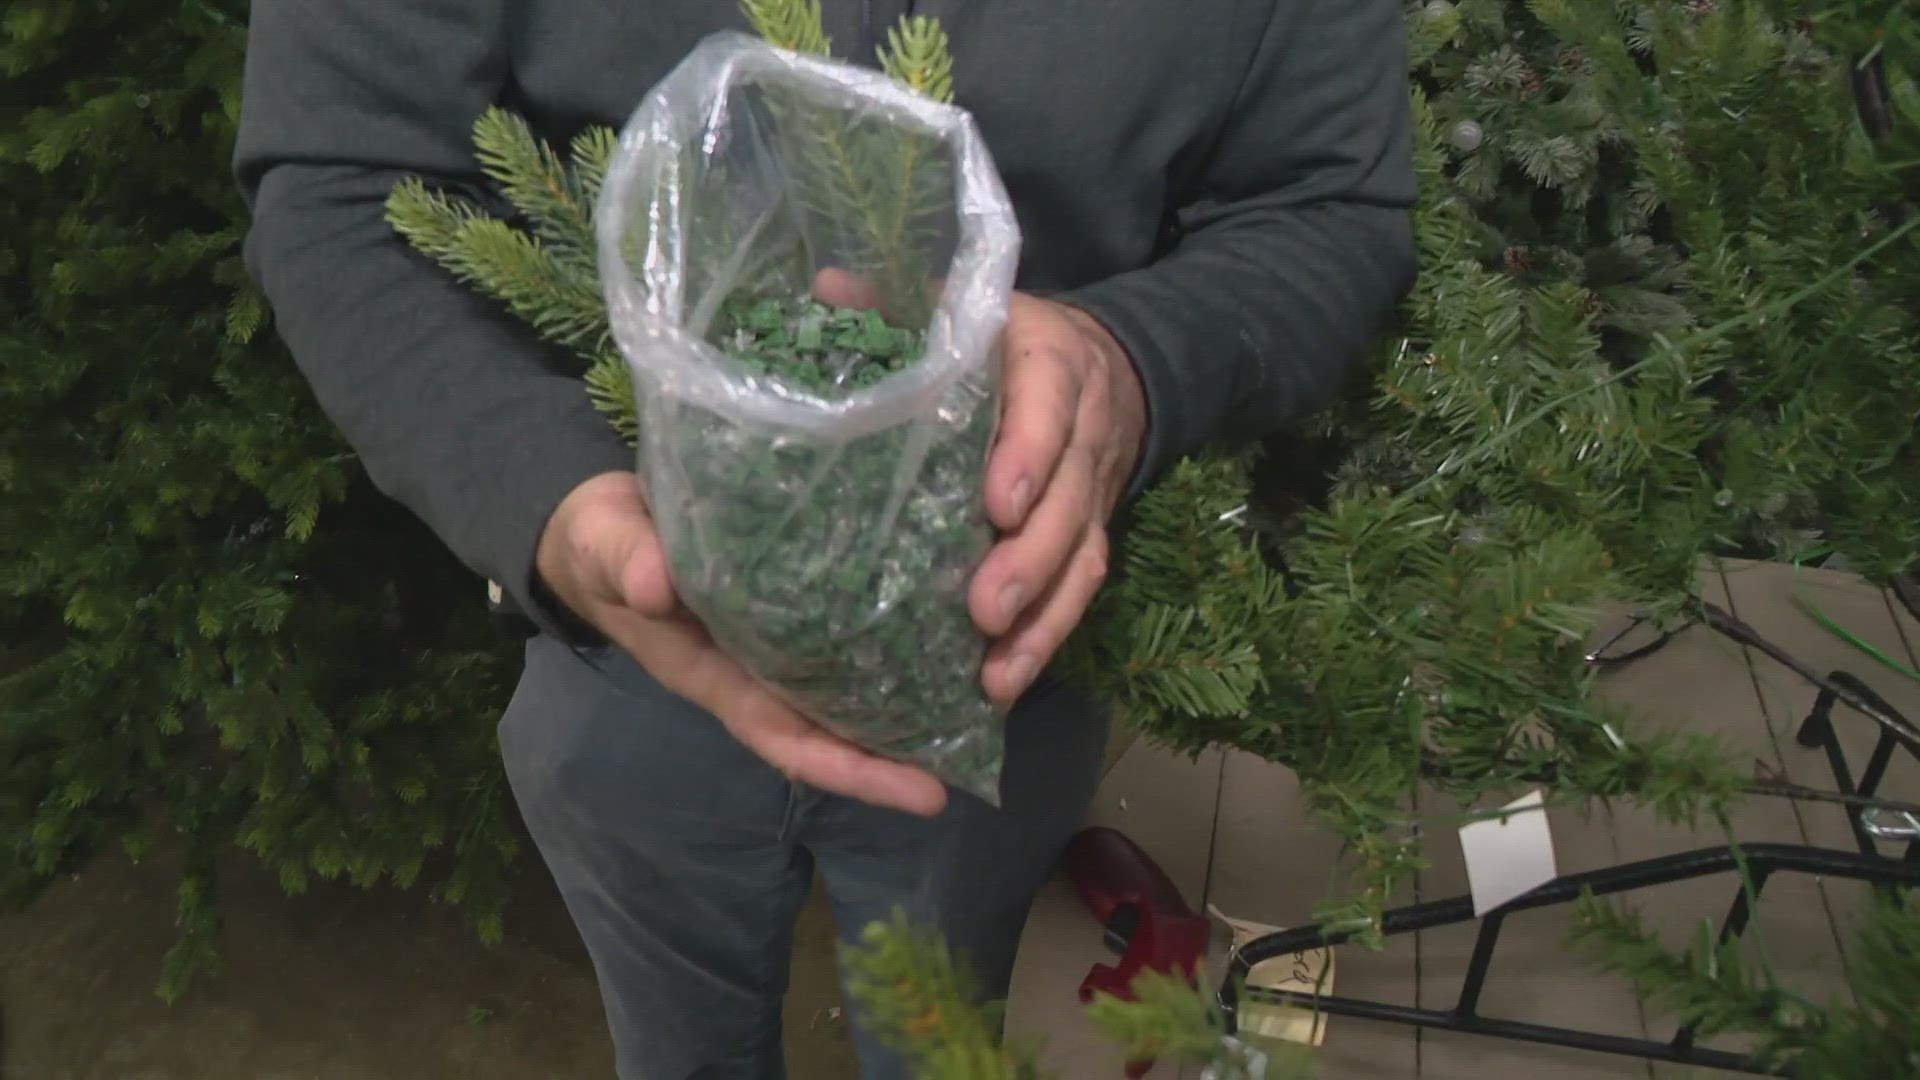 Pat Sullivan joined 13Sunrise Sunday to give some advice on setting up and maintaining artificial Christmas trees this year.